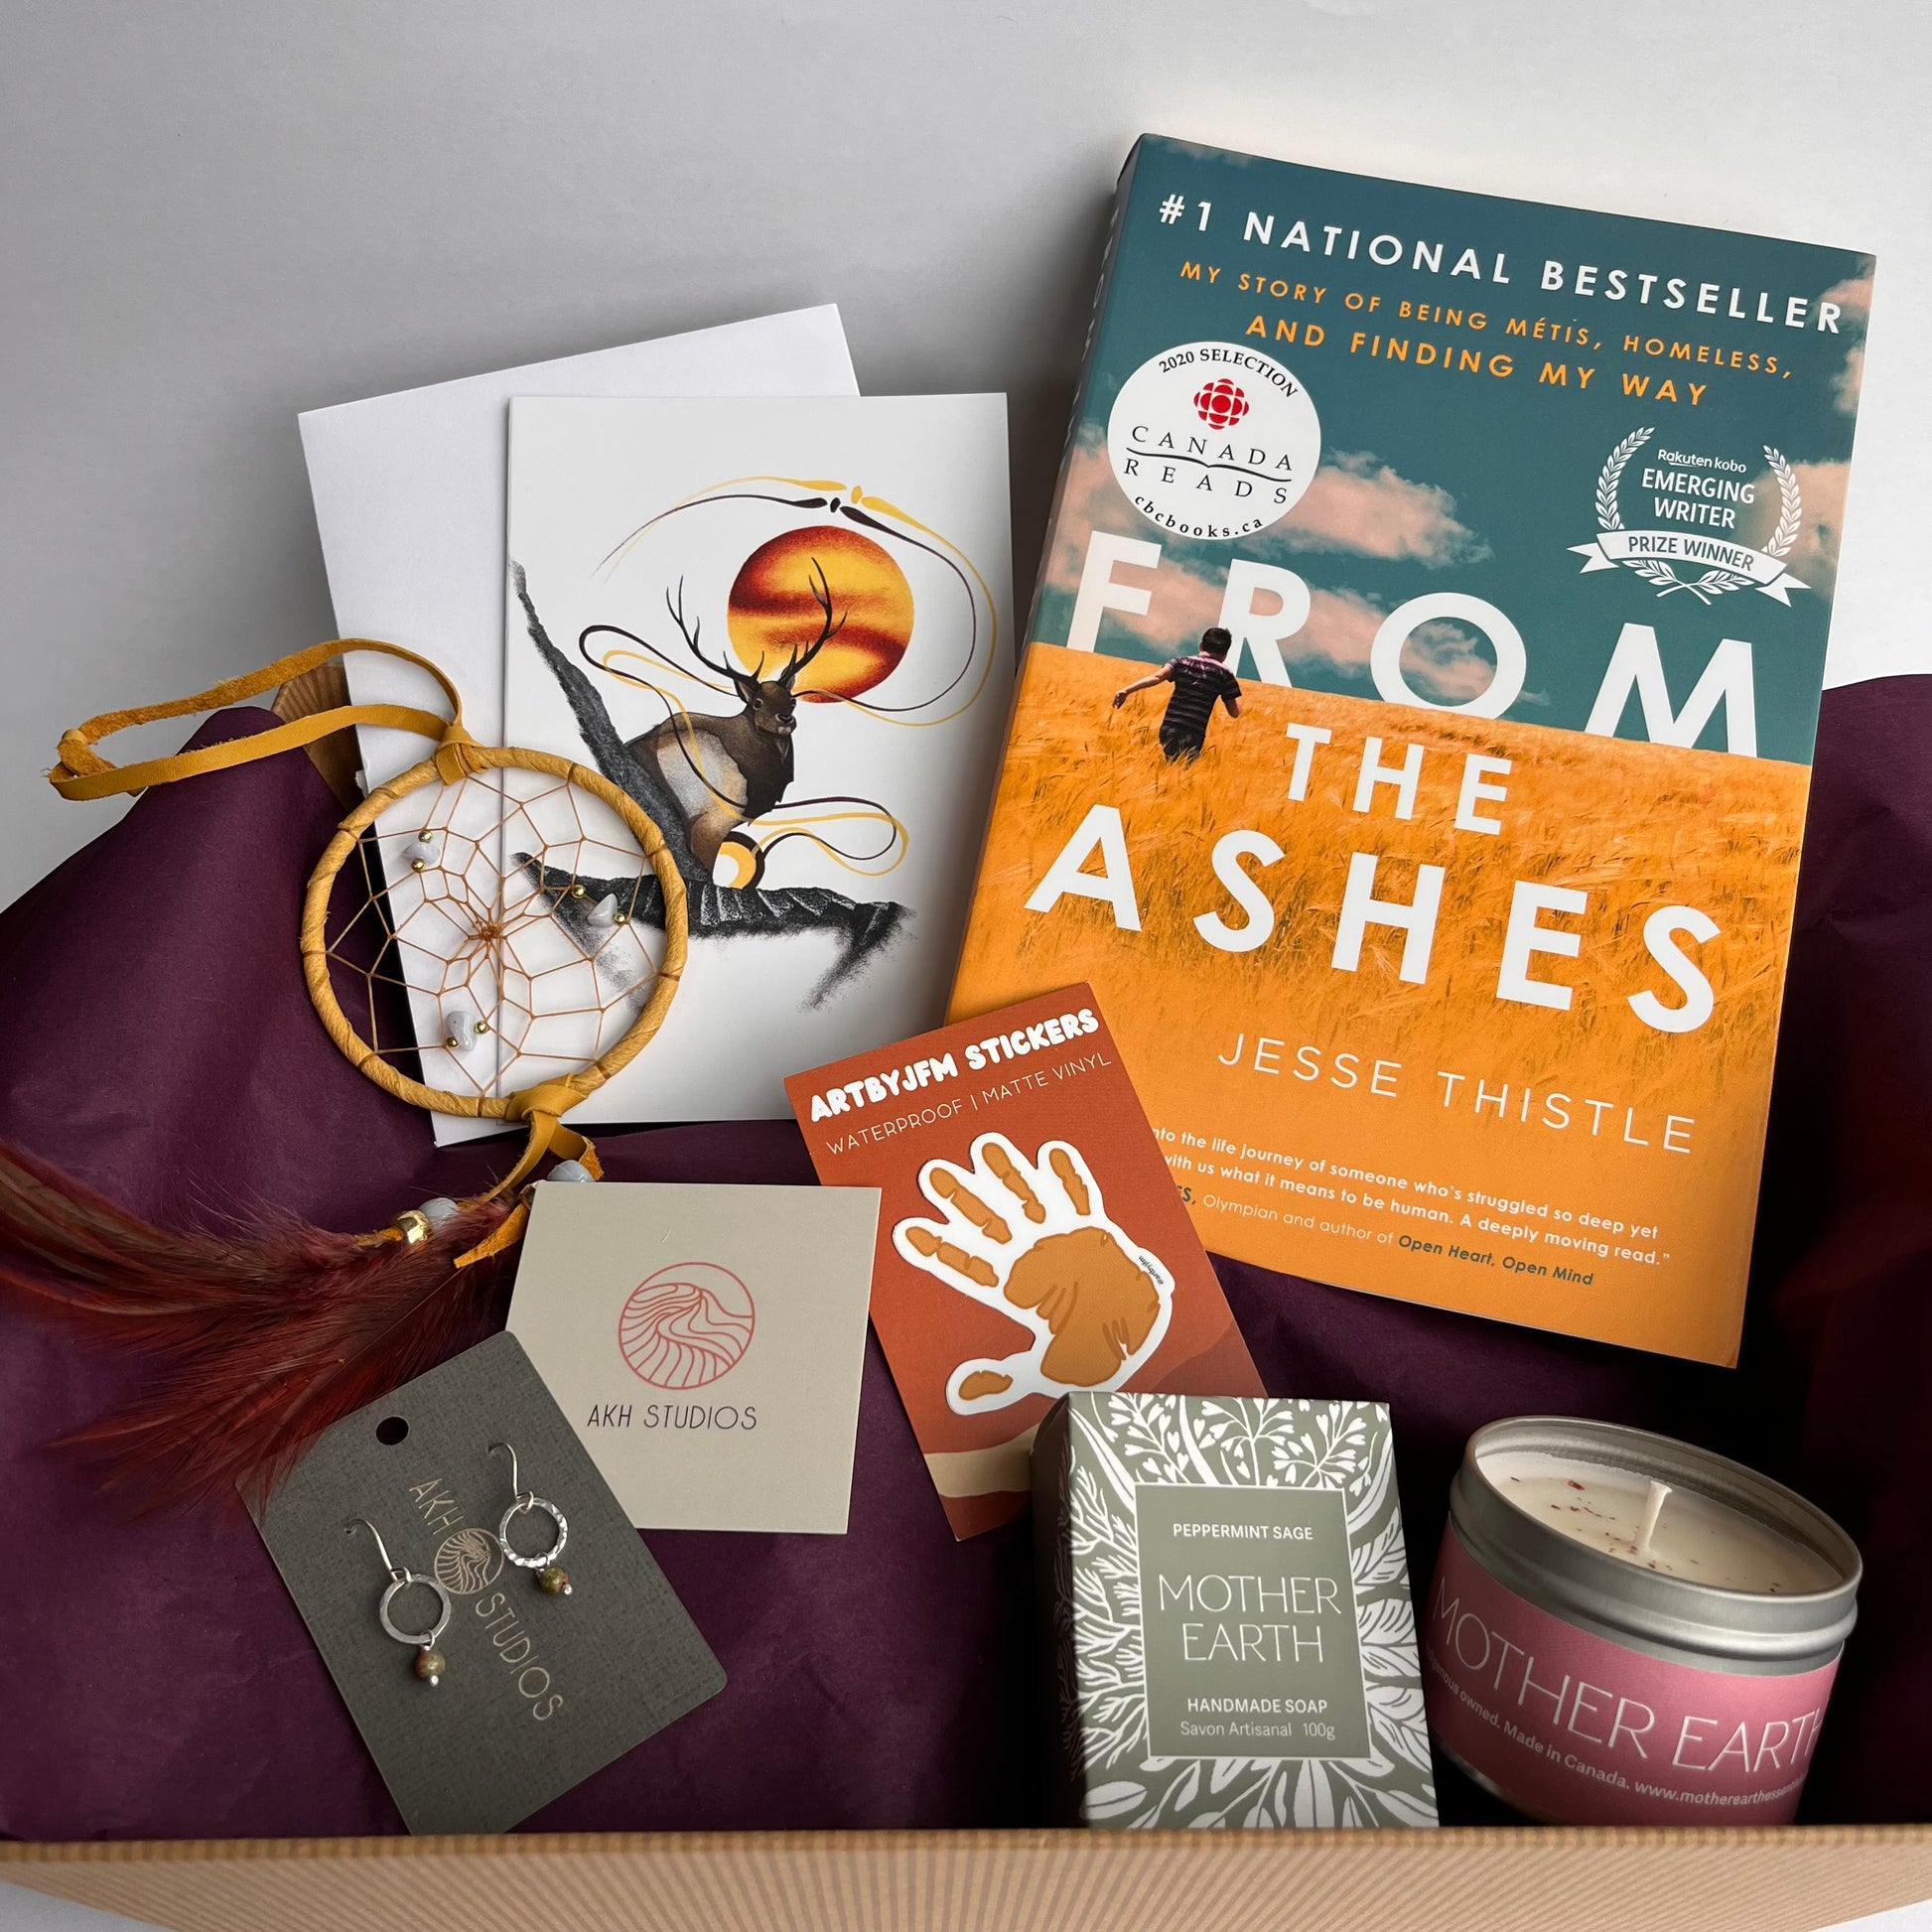 Indigenous Gift Box - Shop First Nations